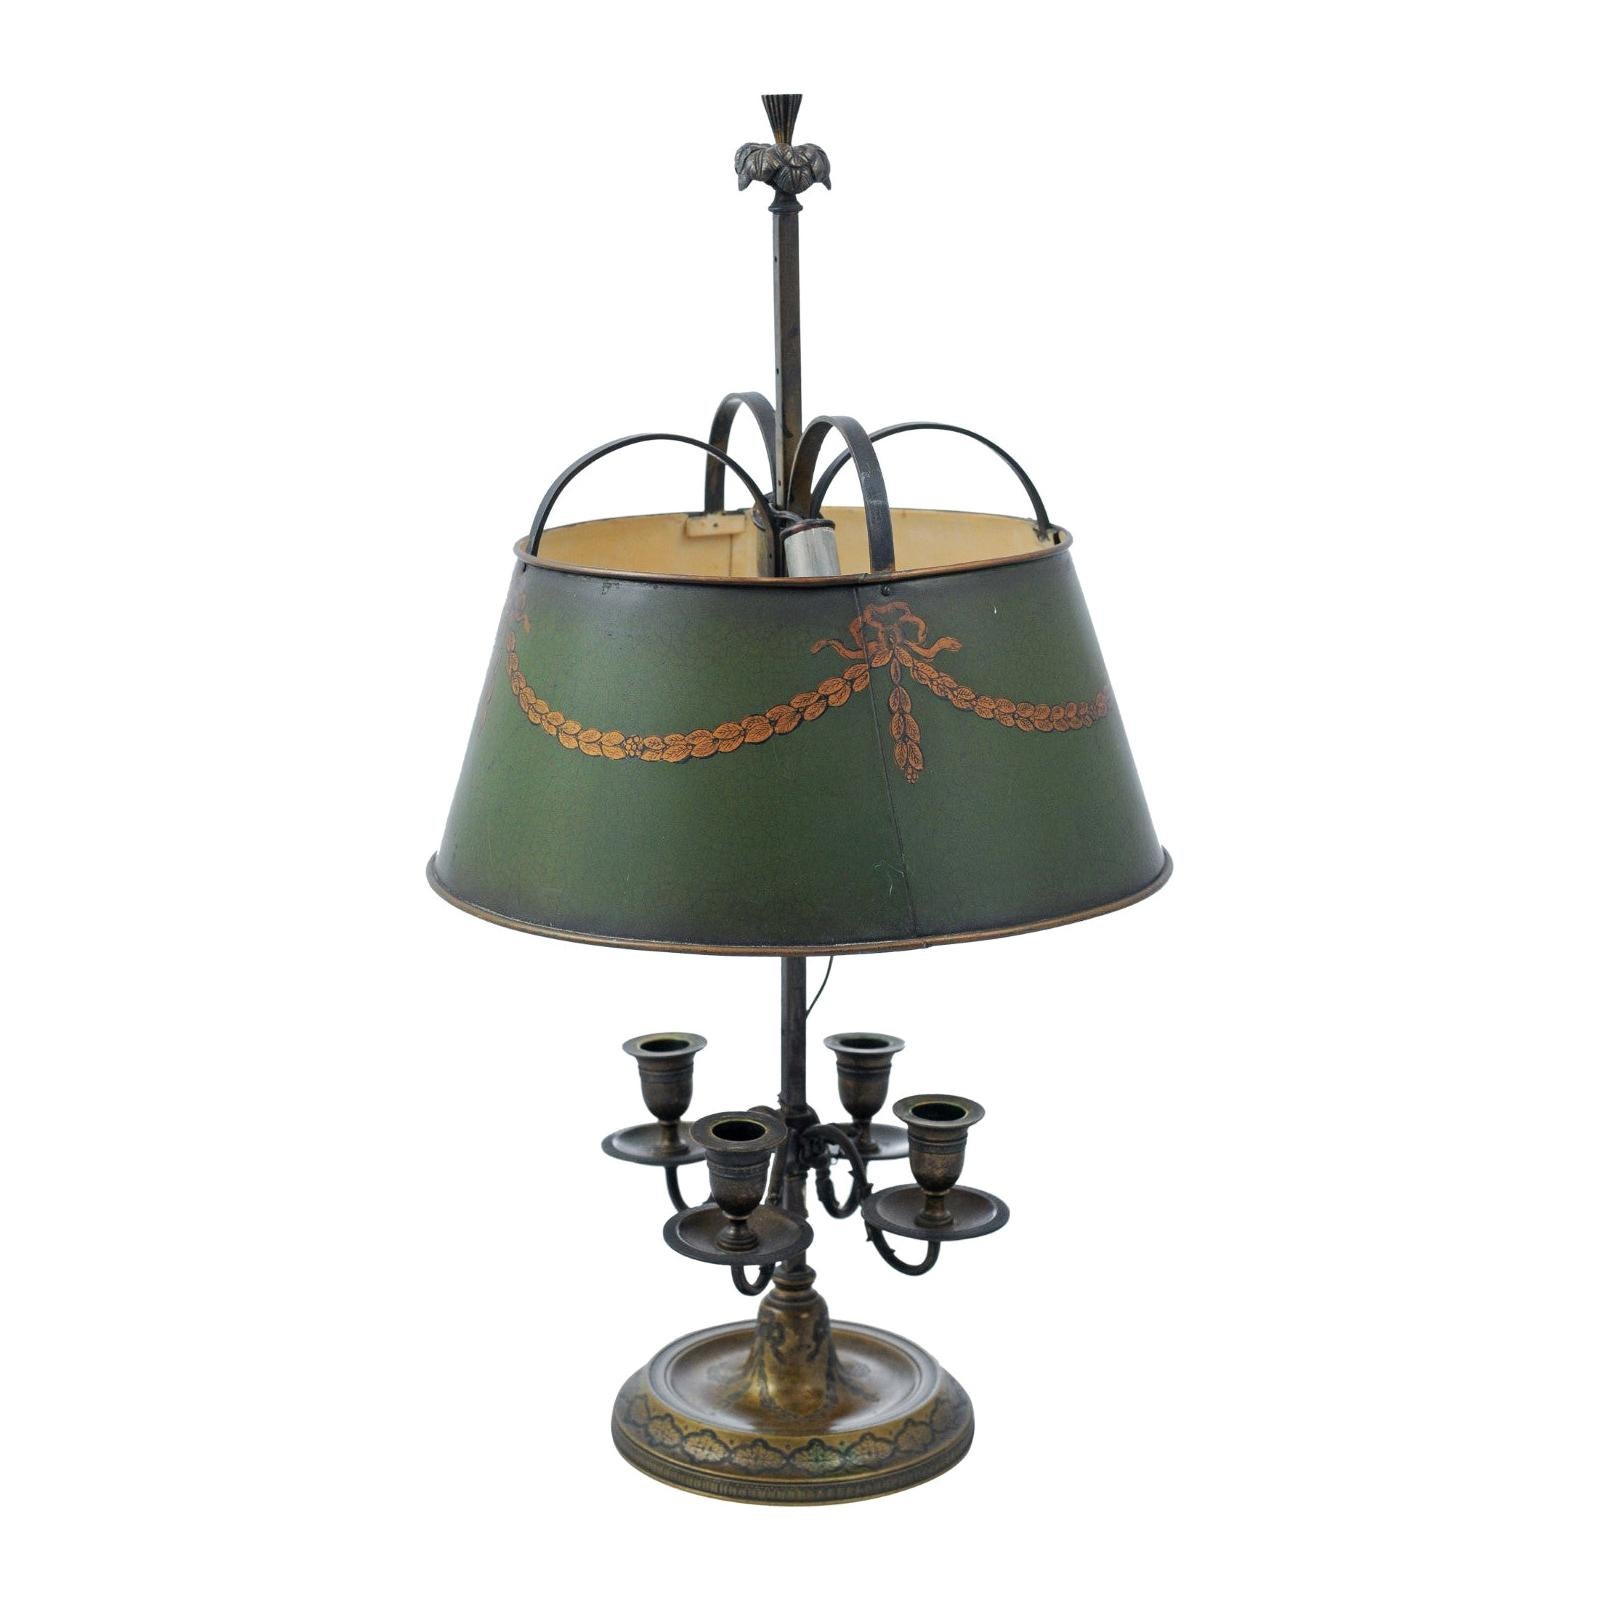 French 1850s Napoléon III Green Painted Tôle Table Lamp with Garland Motifs For Sale